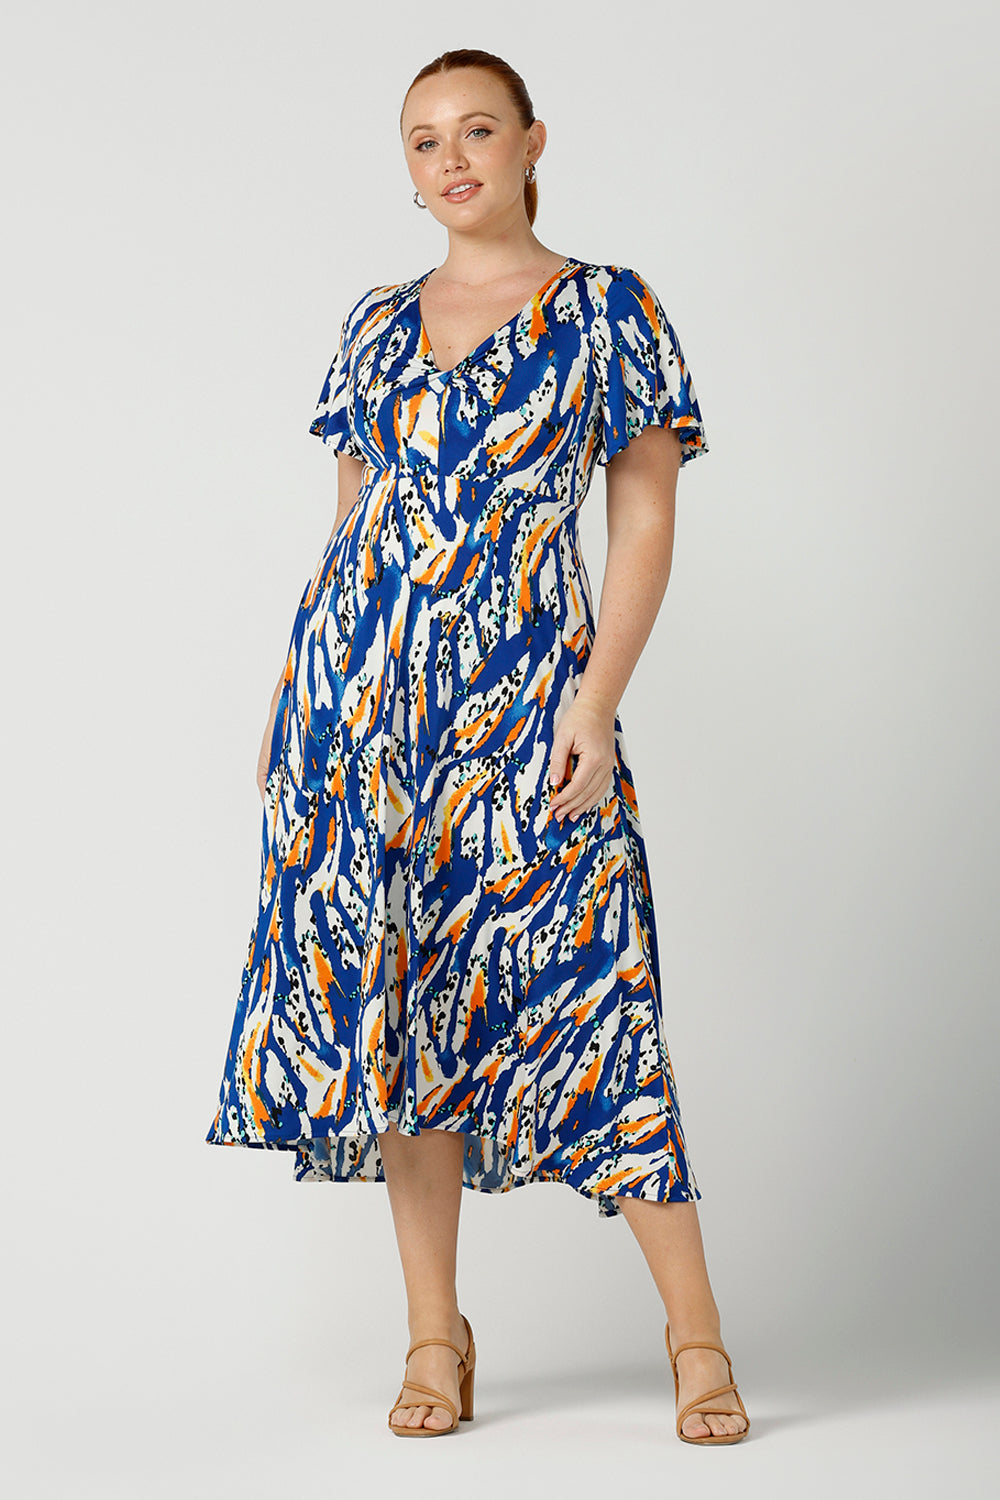 A curvy size, size 12 woman wears a casual slinky jersey midi dress in an abstract print. The dress has short flutter sleeves, a double layer twist front bodice and an asymmetrical skirt - this is a great dress for weekend and travel style.